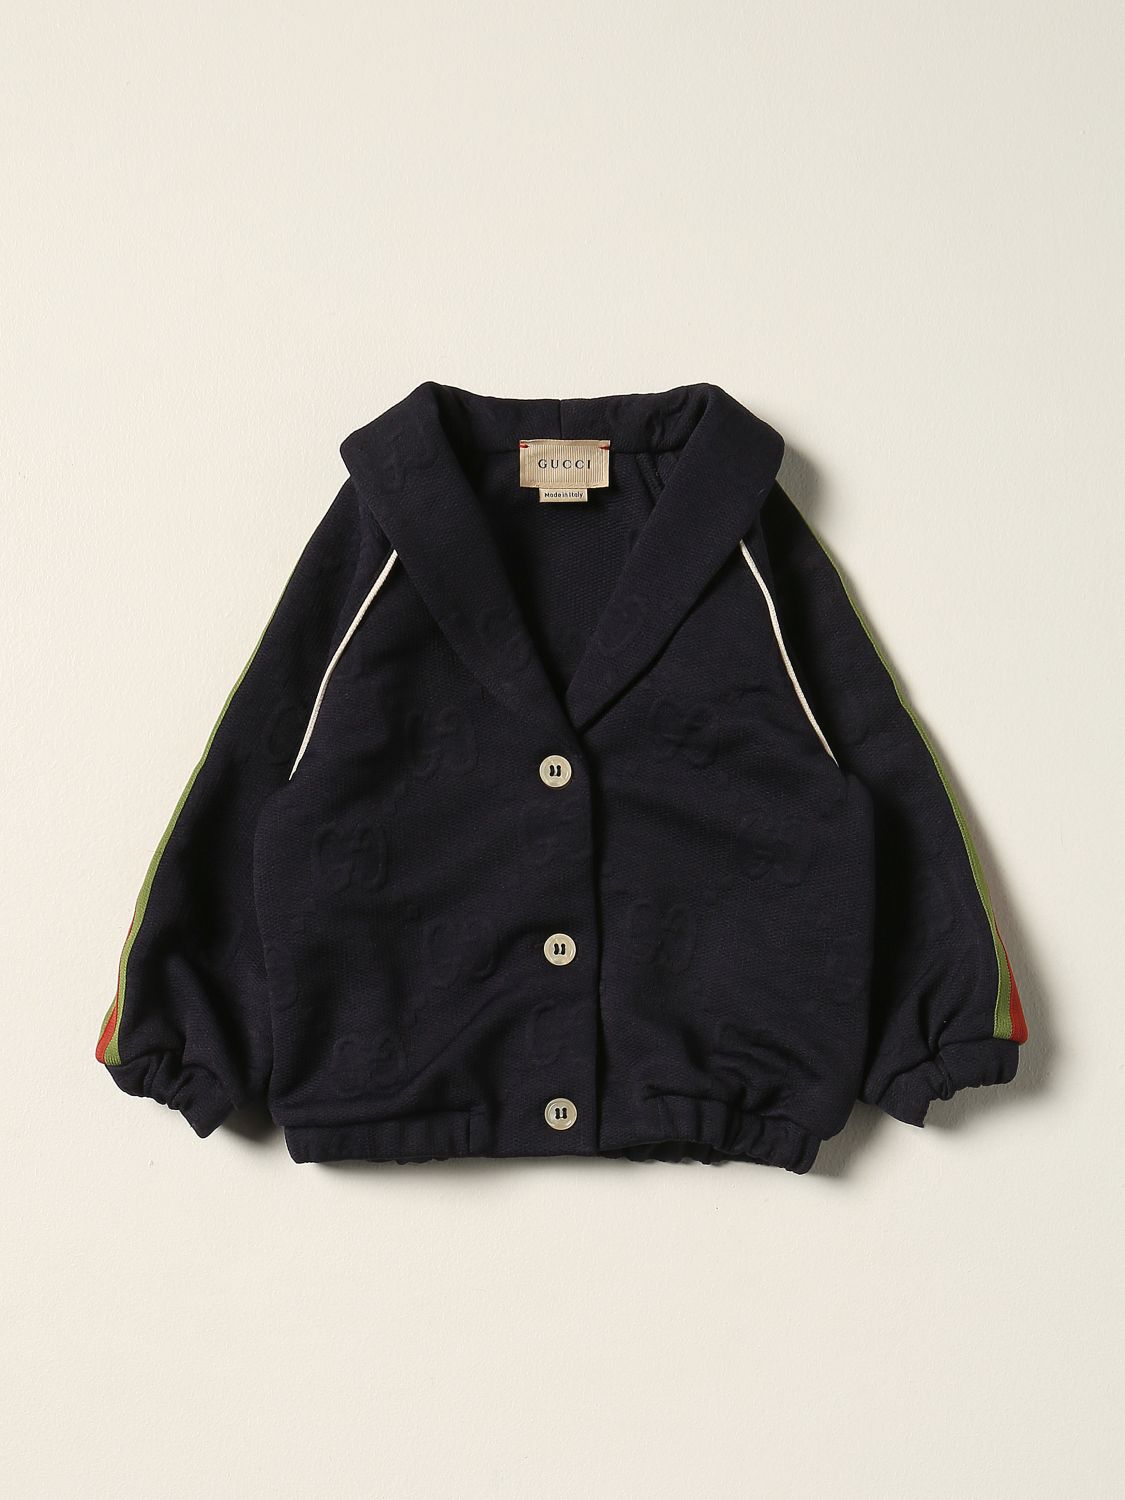 nylon jacket with Web bands | Jacket Gucci Kids Multicolor | Jacket 658139 XJDMW GIGLIO.COM